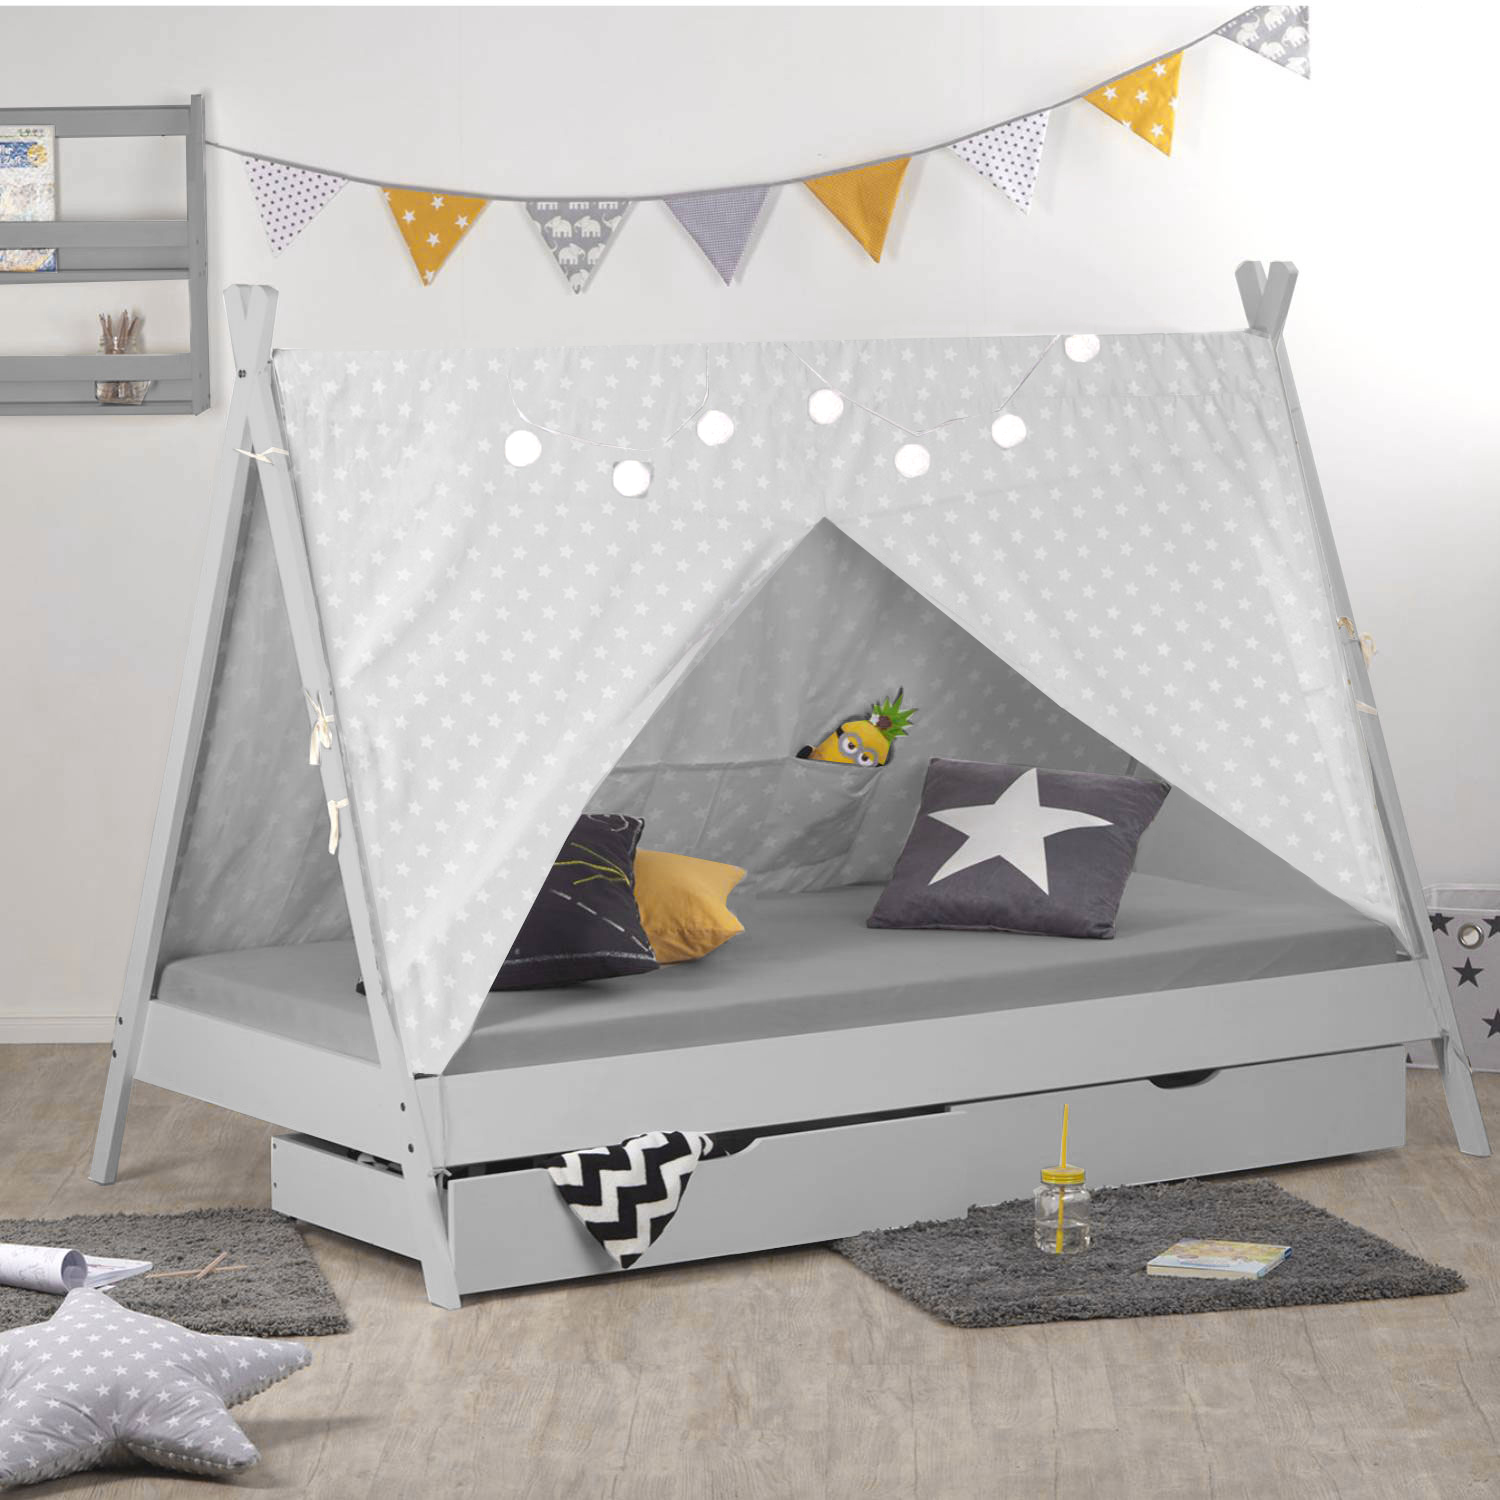 Children's Bed with Mattress TIPI 90x200 Youth Bed White Grey Wooden Bed Kids Room Fabric Bed Drawer